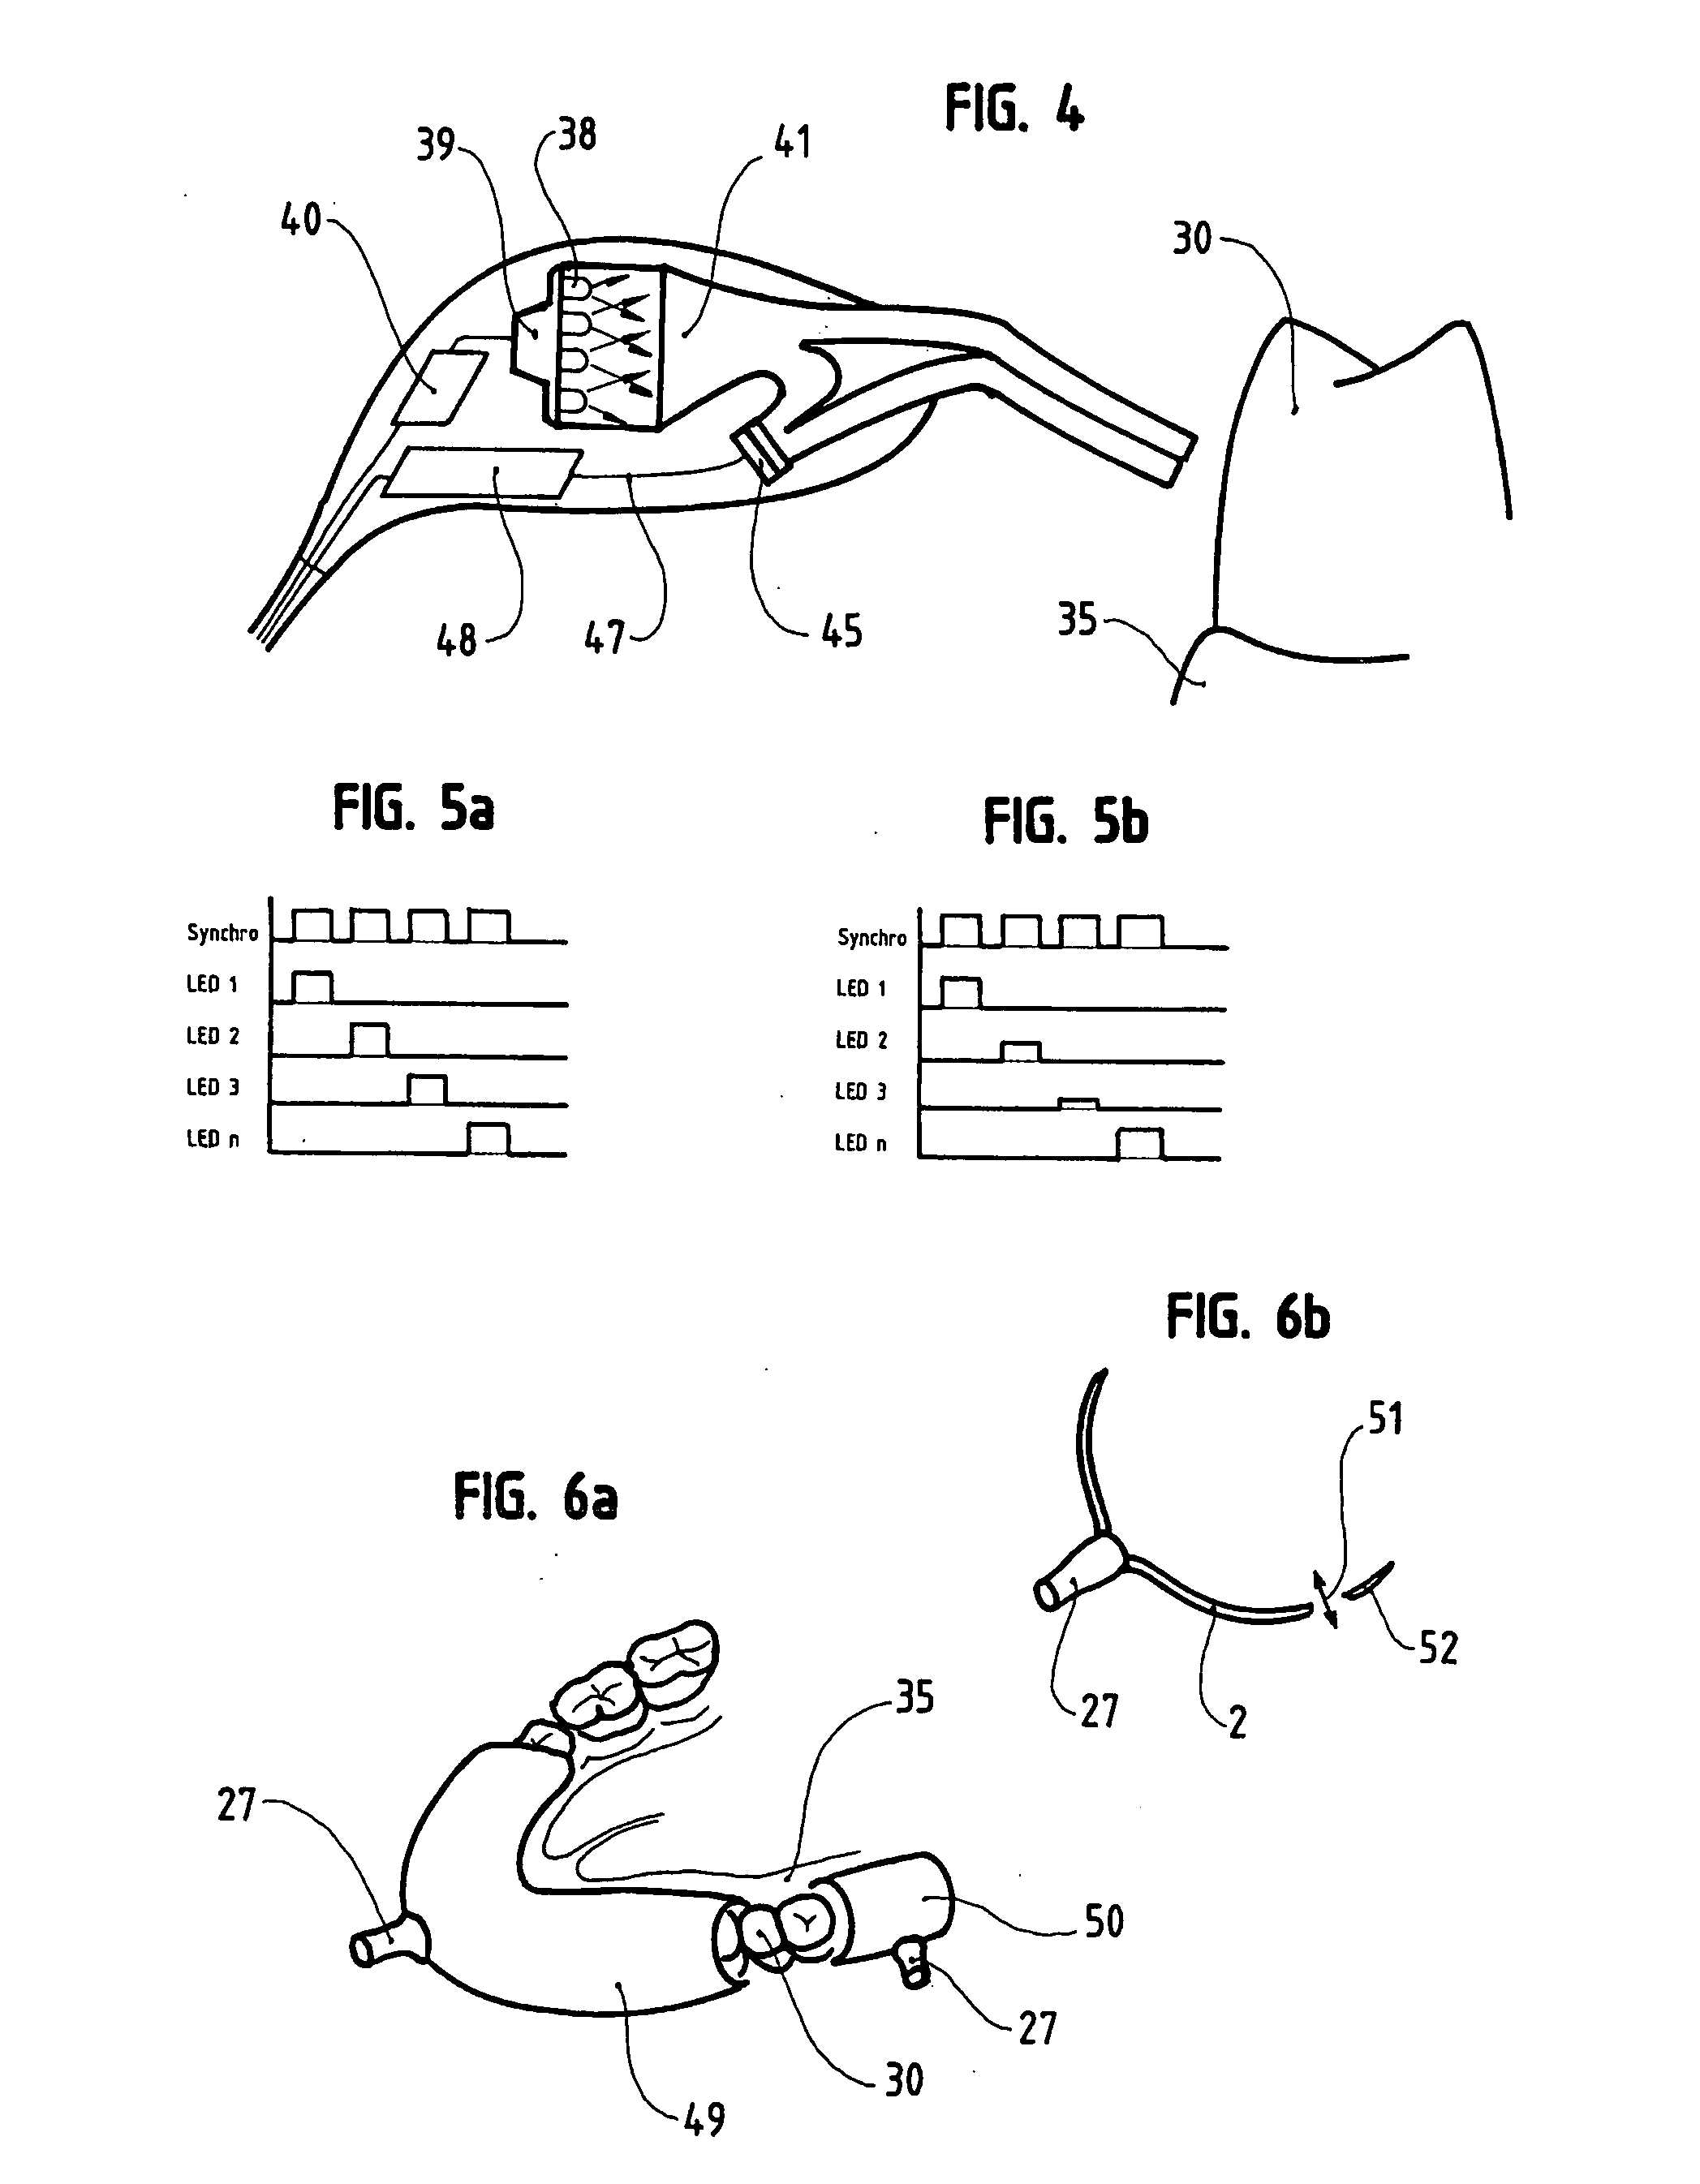 Bleaching device using electro-optical and chemical means namely in the medical and dental field